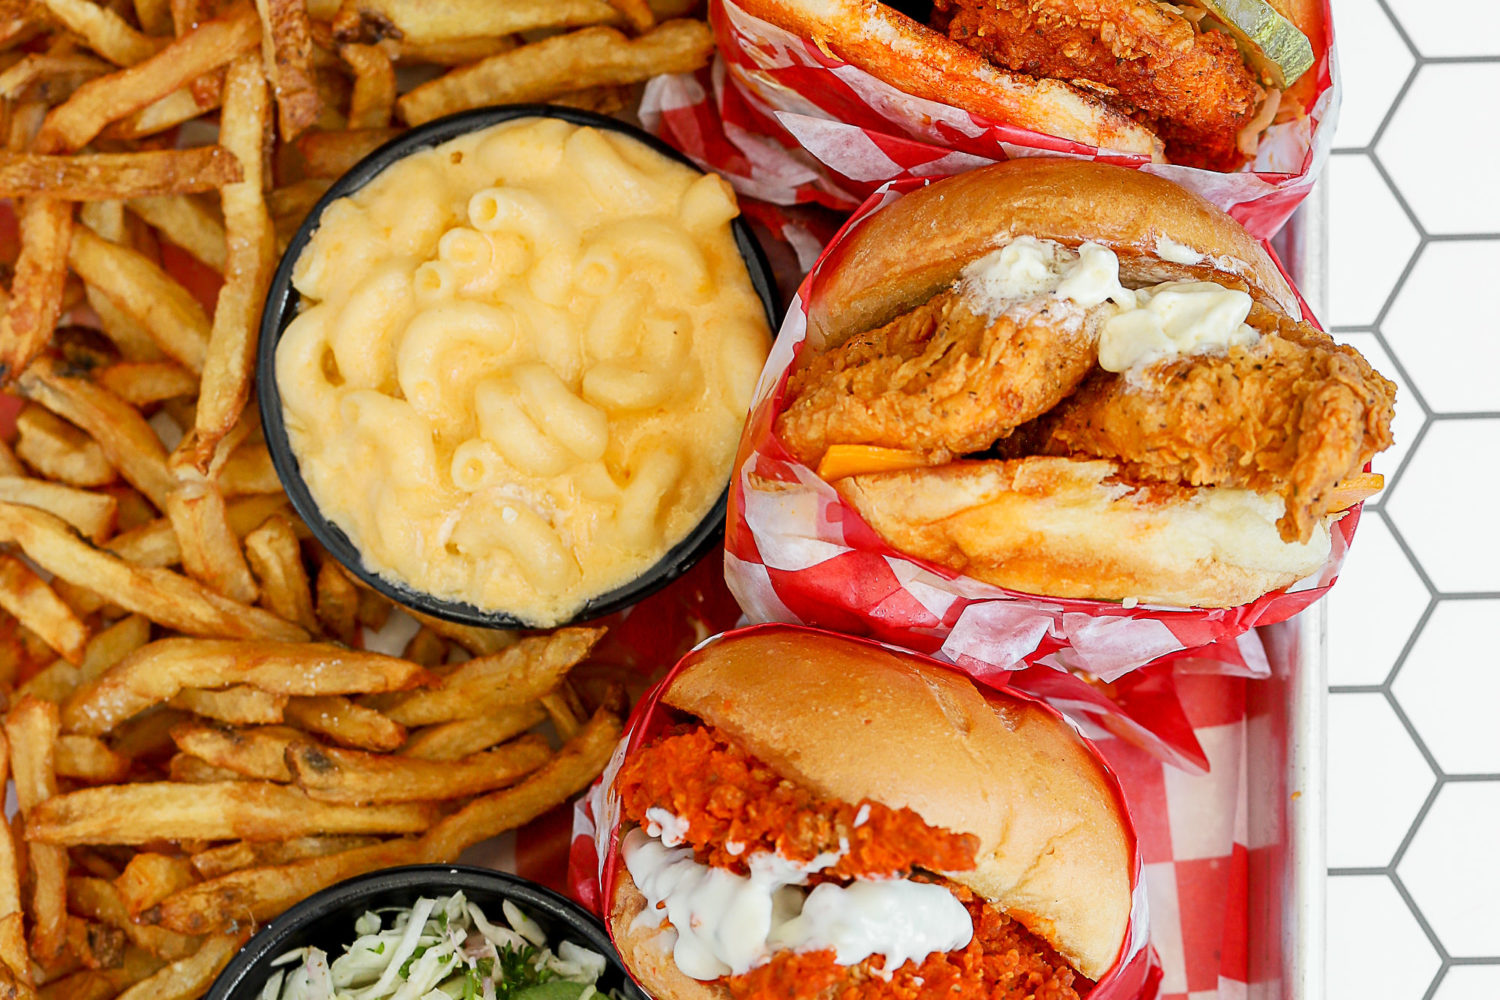 Roaming Rooster is bringing fried chicken sandwiches and more to U Street. Photo courtesy of Roaming Rooster.